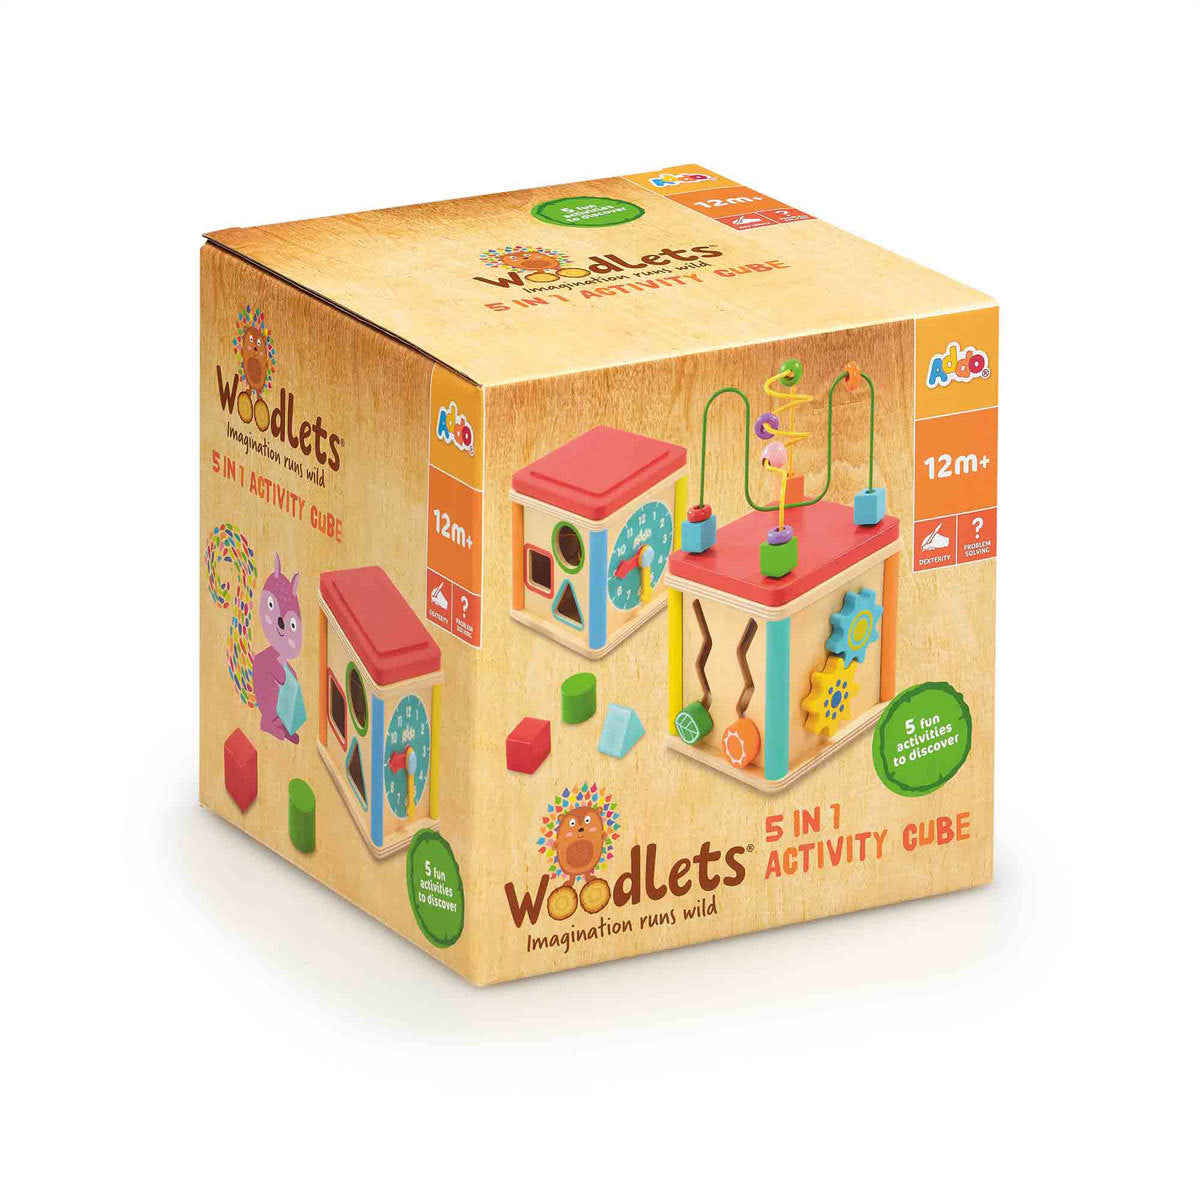 Woodlets 5 in 1 Activity Cube